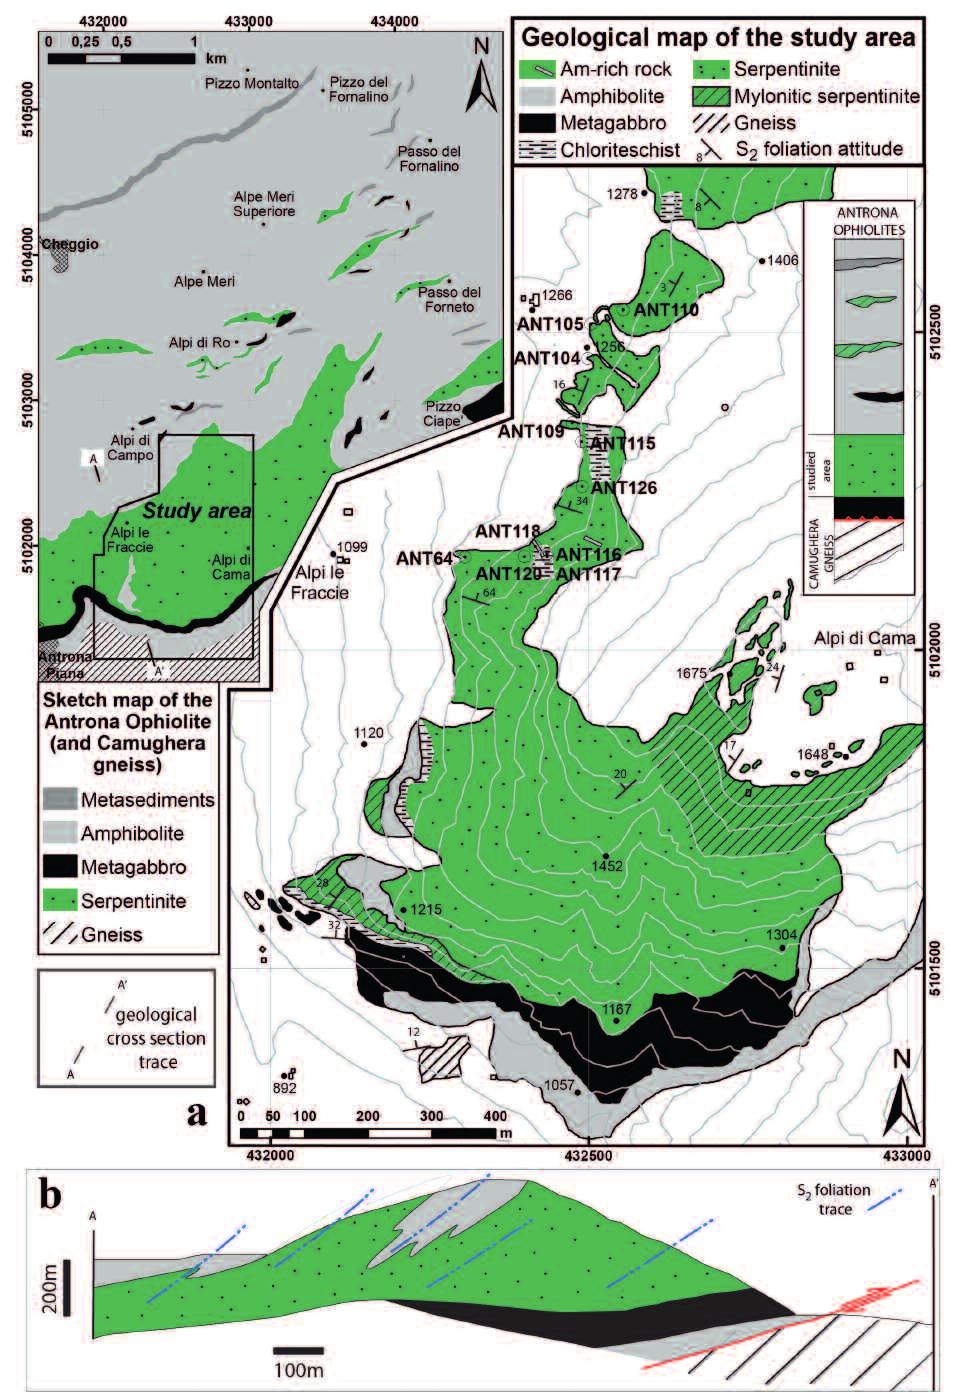 170 Fig. 2 - Geology of the study area. a) Geological map of the Antrona ophiolite with location of the study area (inset).